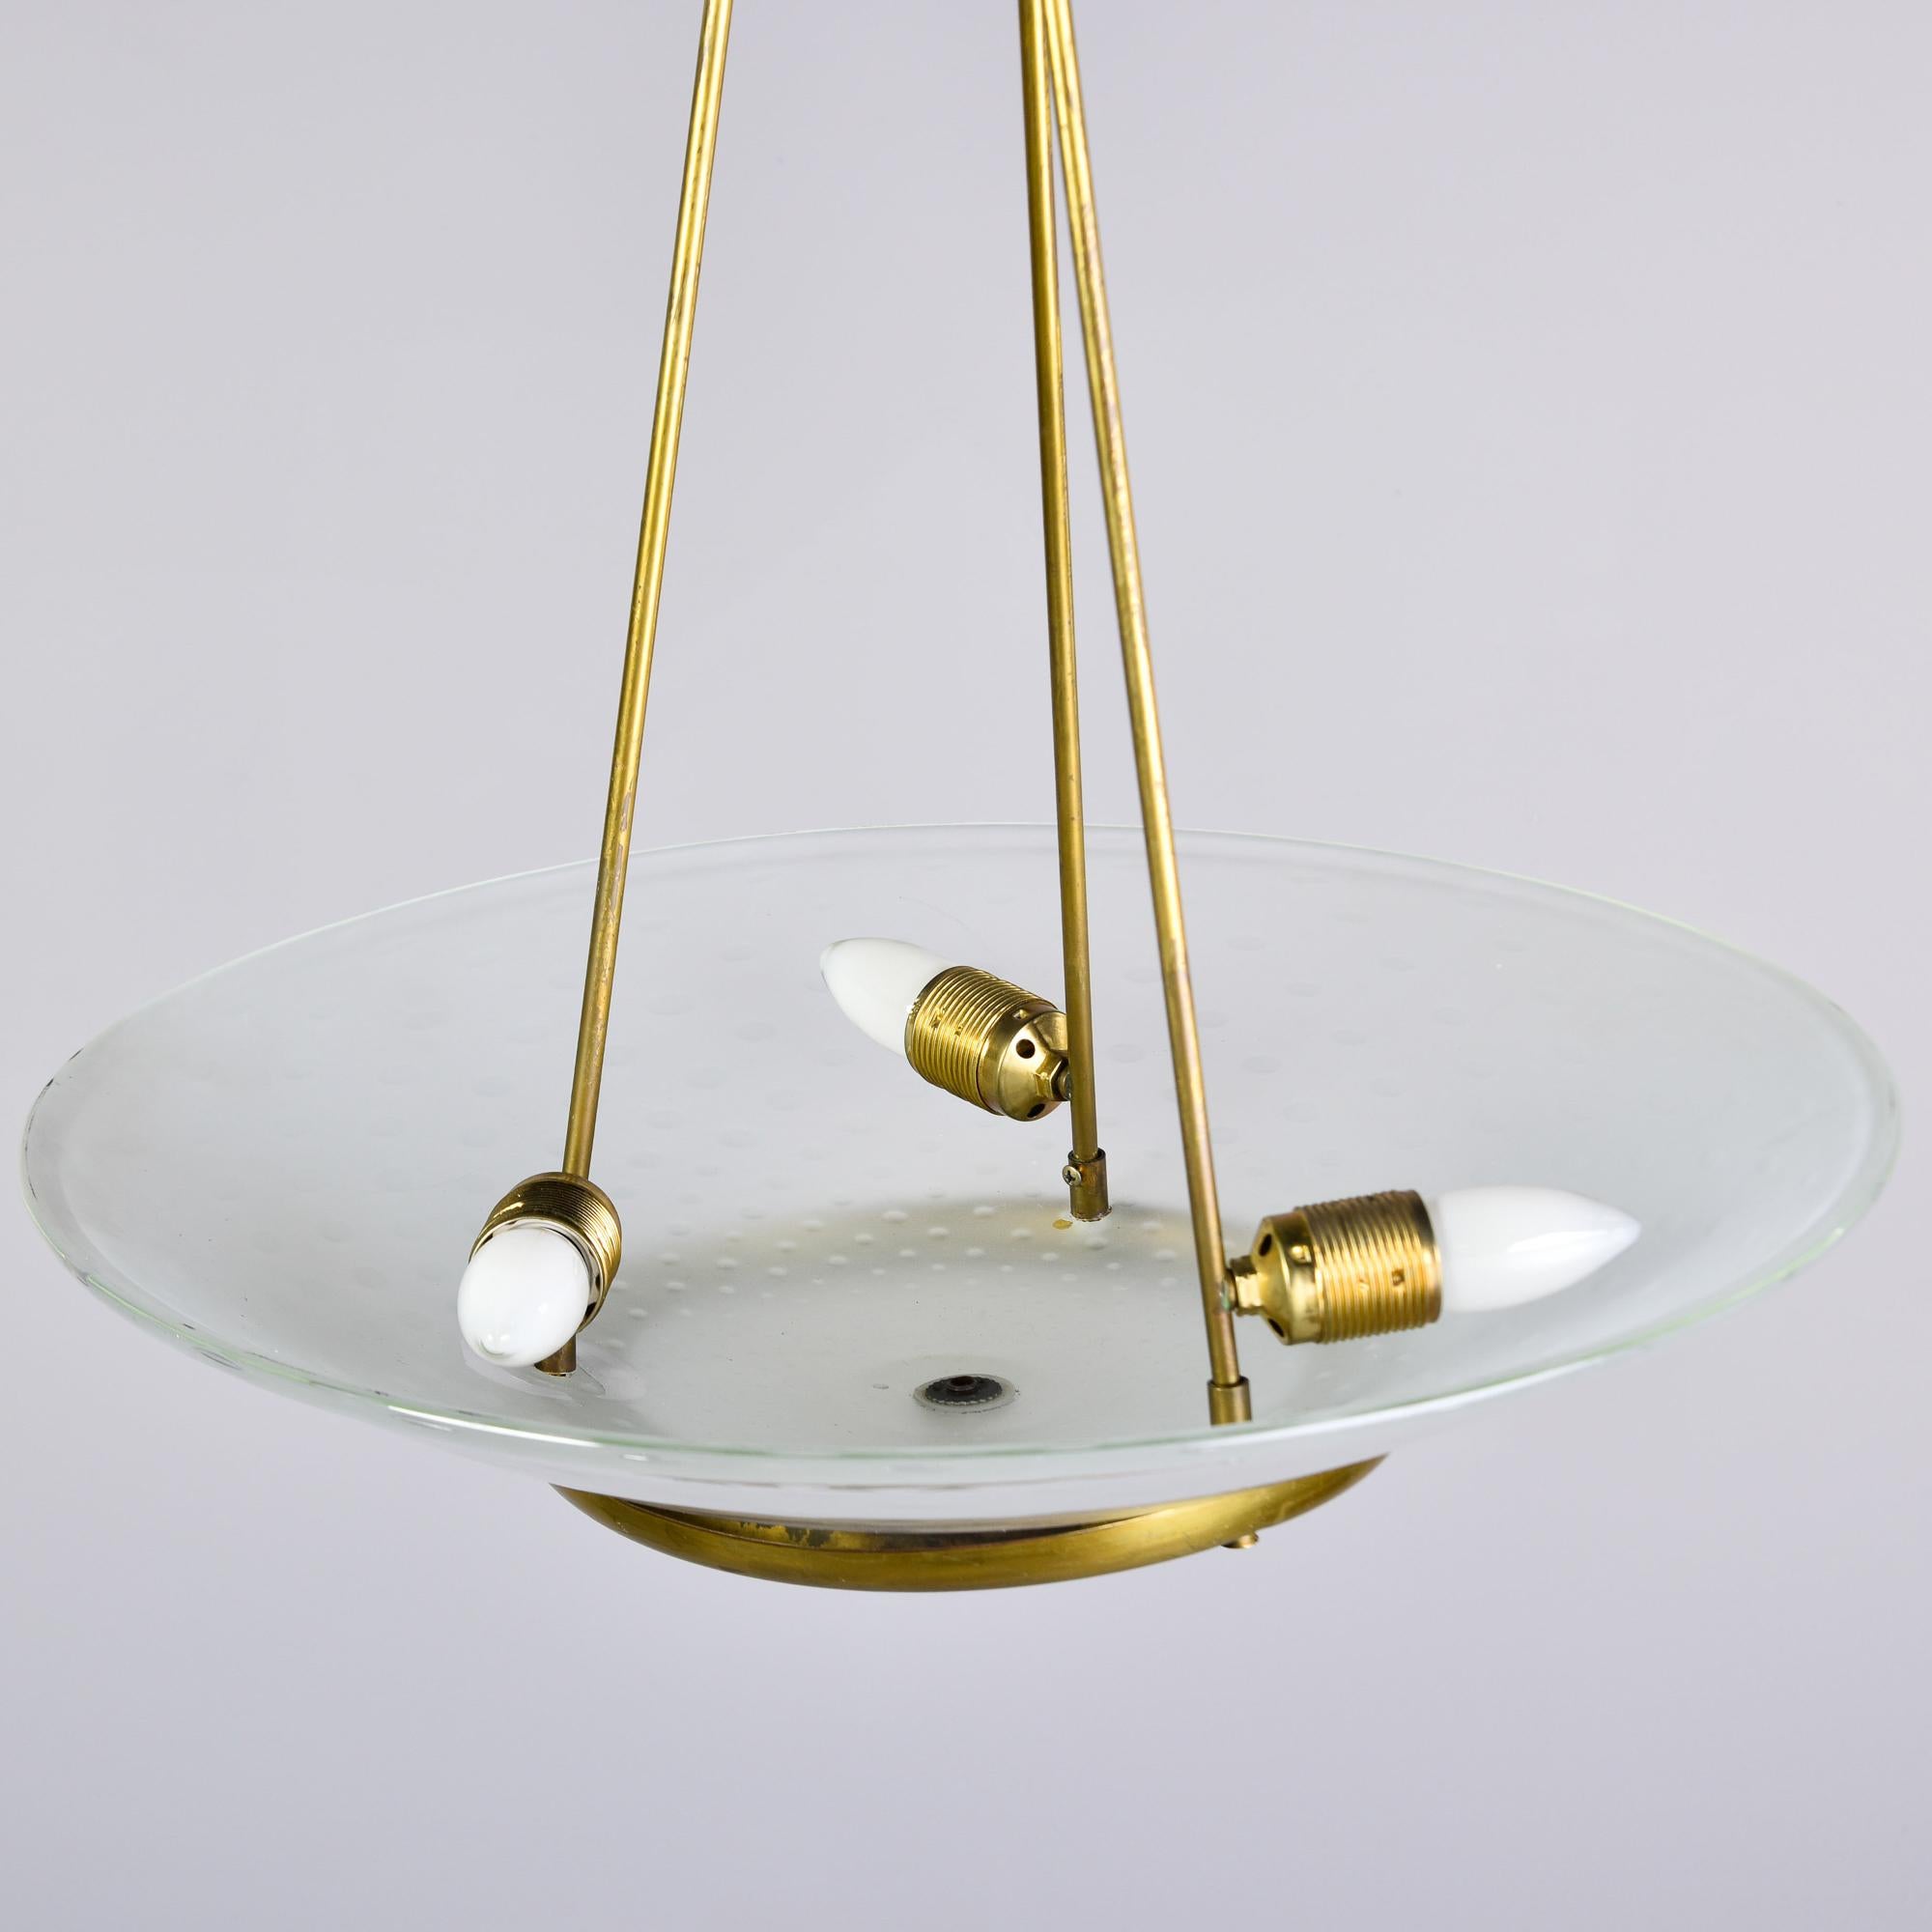 New Three Light Vecchio Chandelier in Brass with Murano Bubble Glass Shade For Sale 4